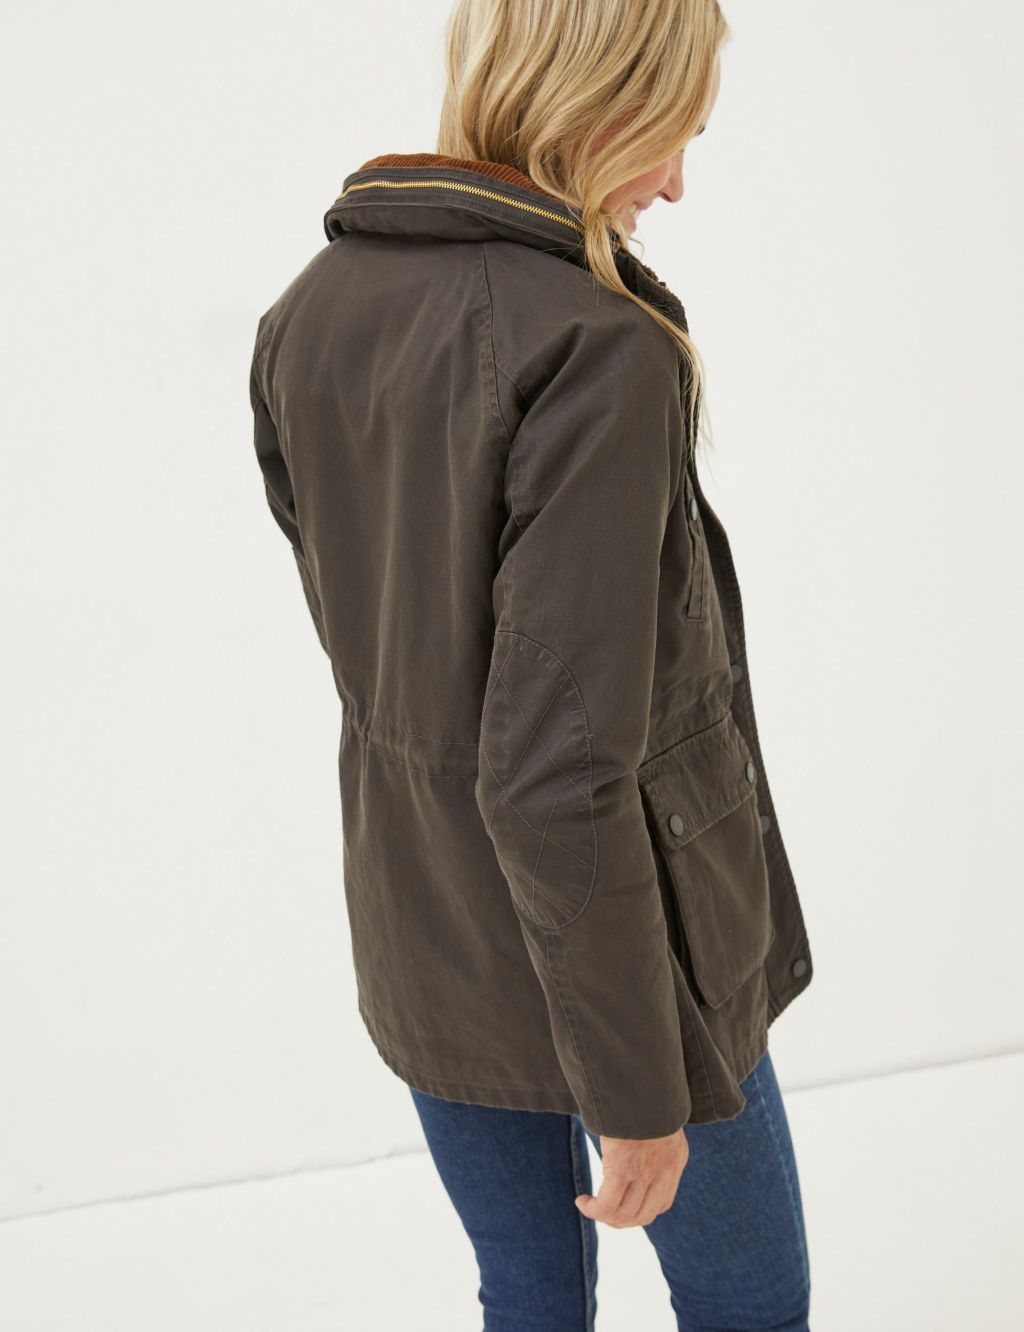 Cotton Rich Hooded Utility Jacket image 4